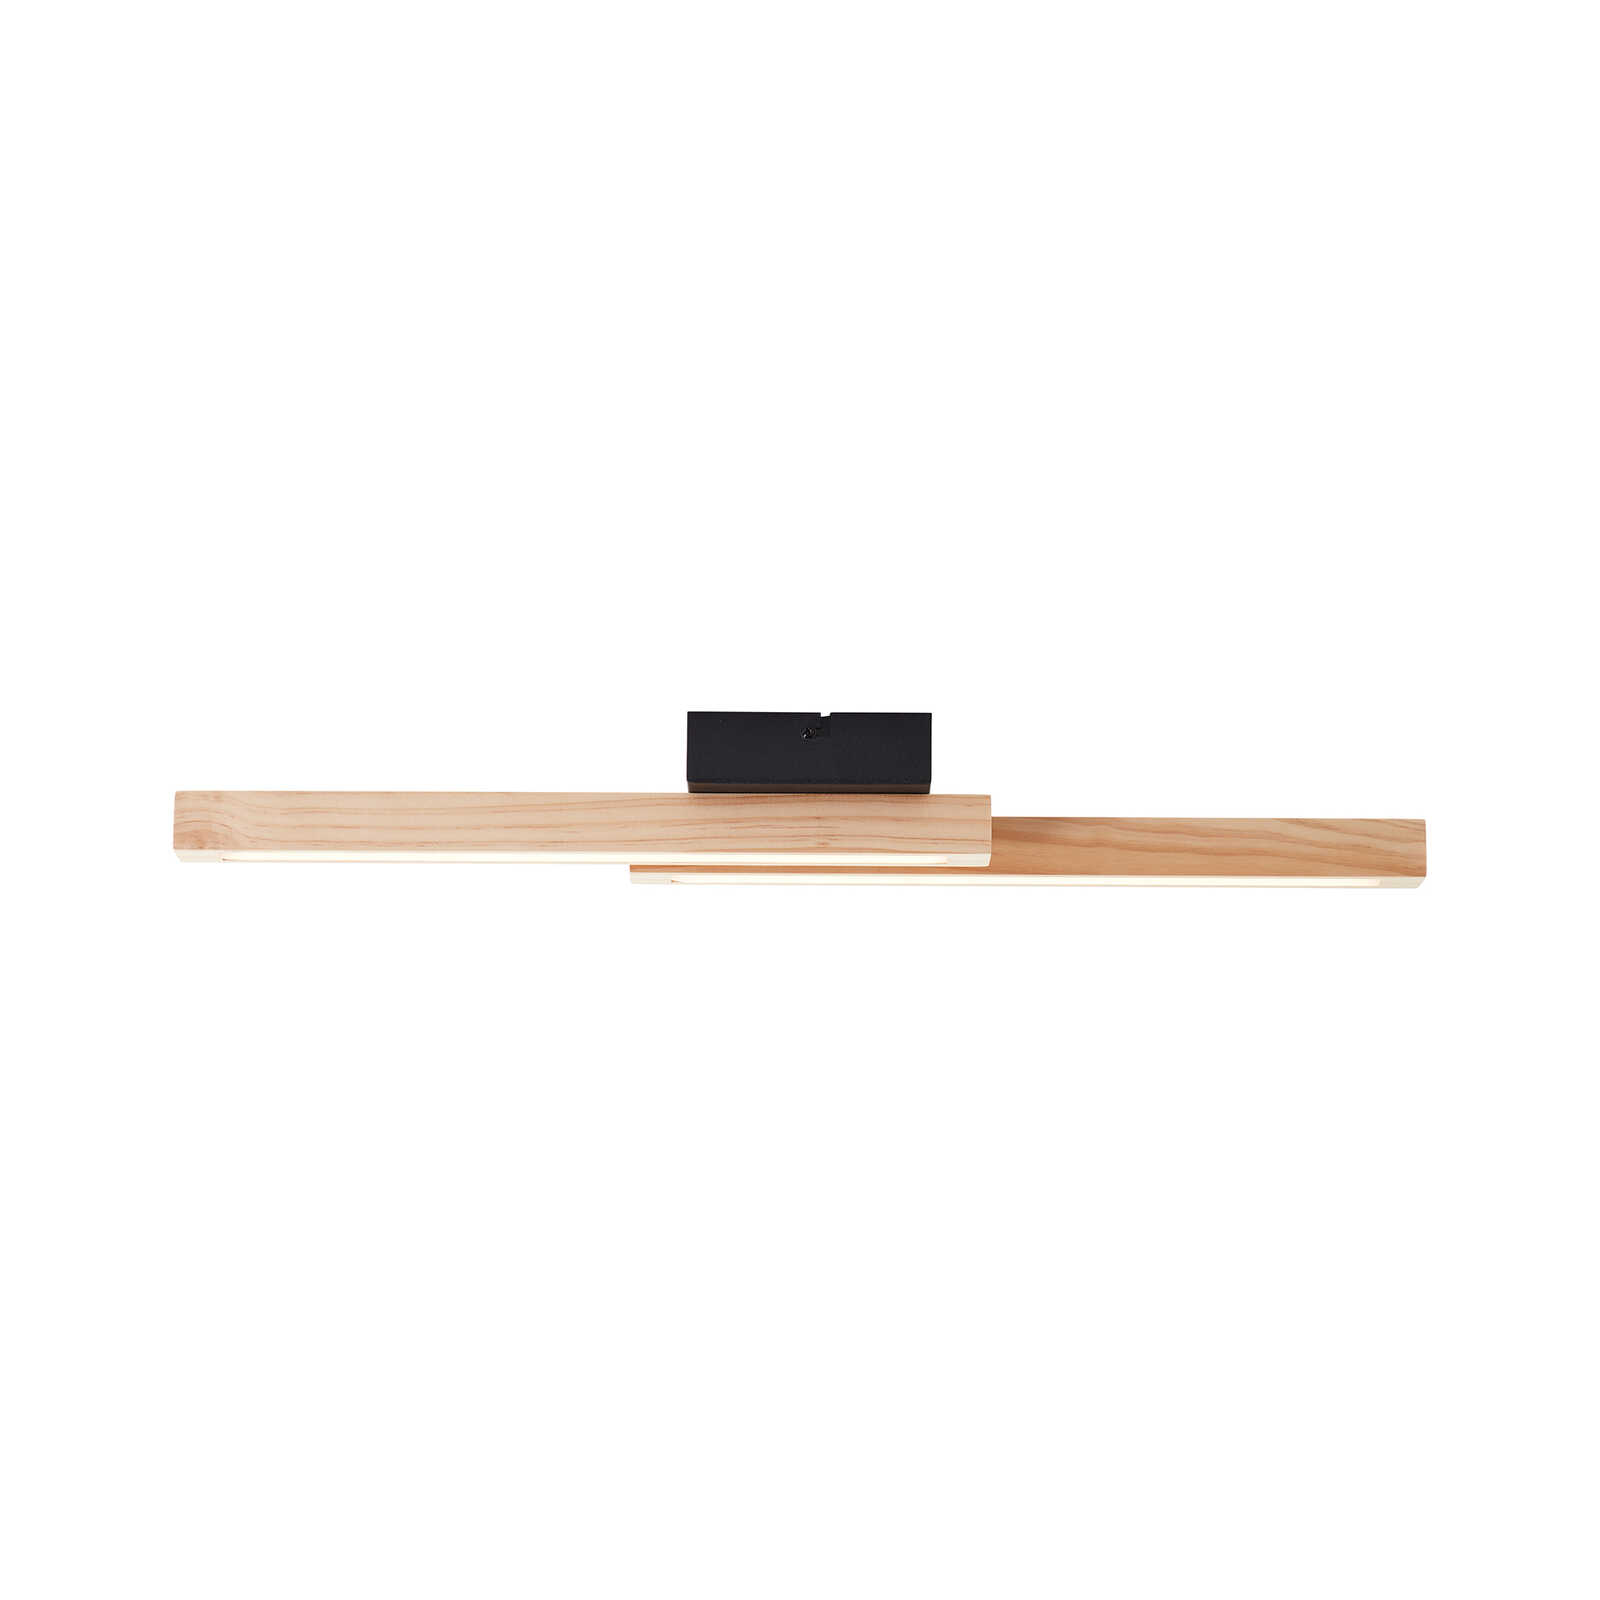 Wooden ceiling light - Anabelle 1 - Brown
